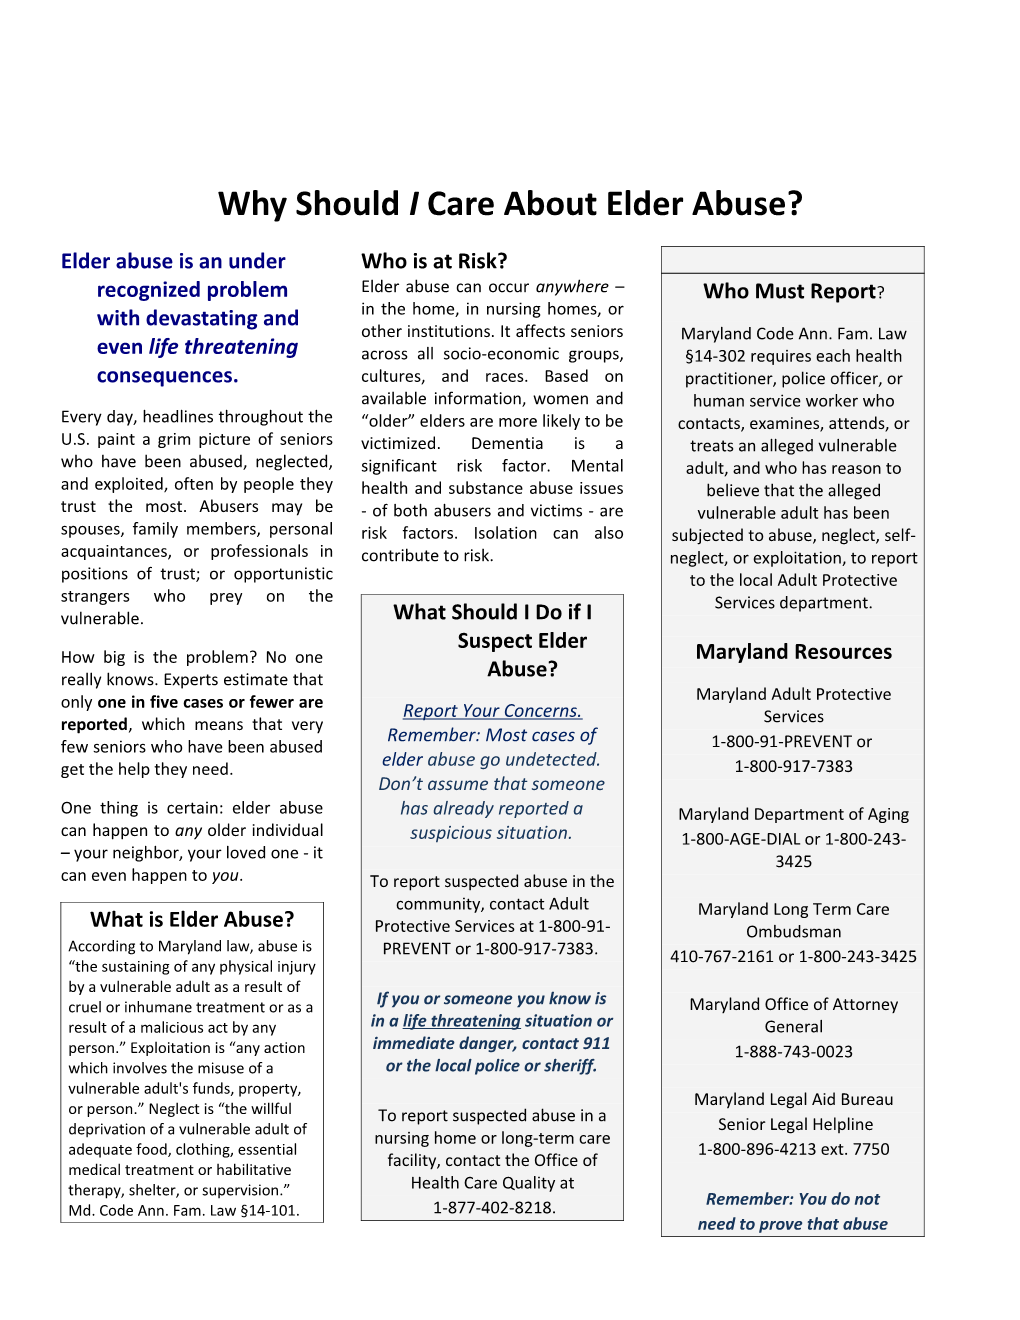 Why Should I Care About Elder Abuse